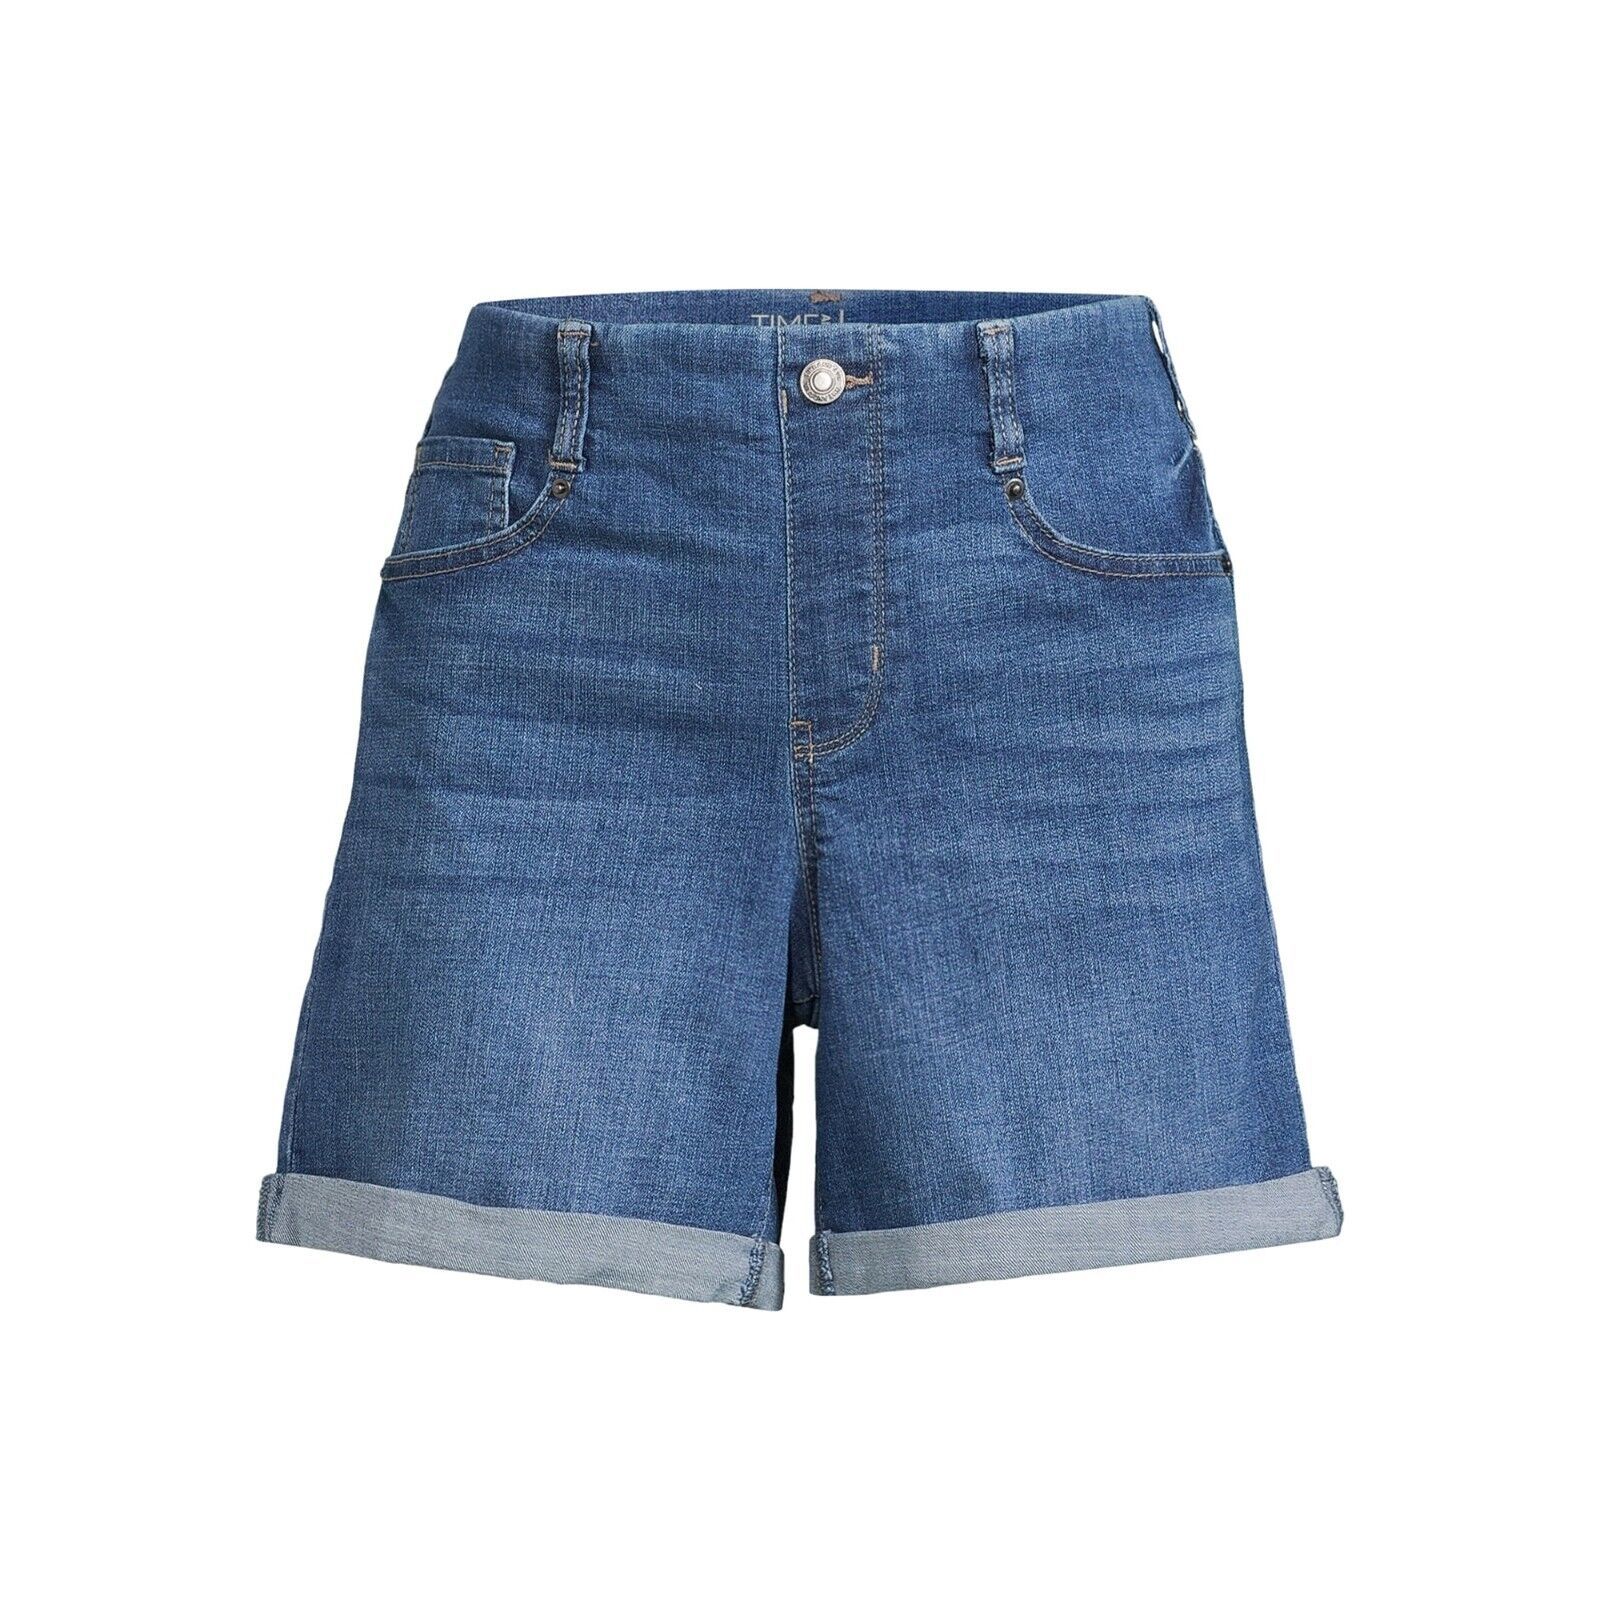 Primary image for Time and Tru Women's Denim Shorts with Cuffed Hem, MEDWSH Size XL(16-18)